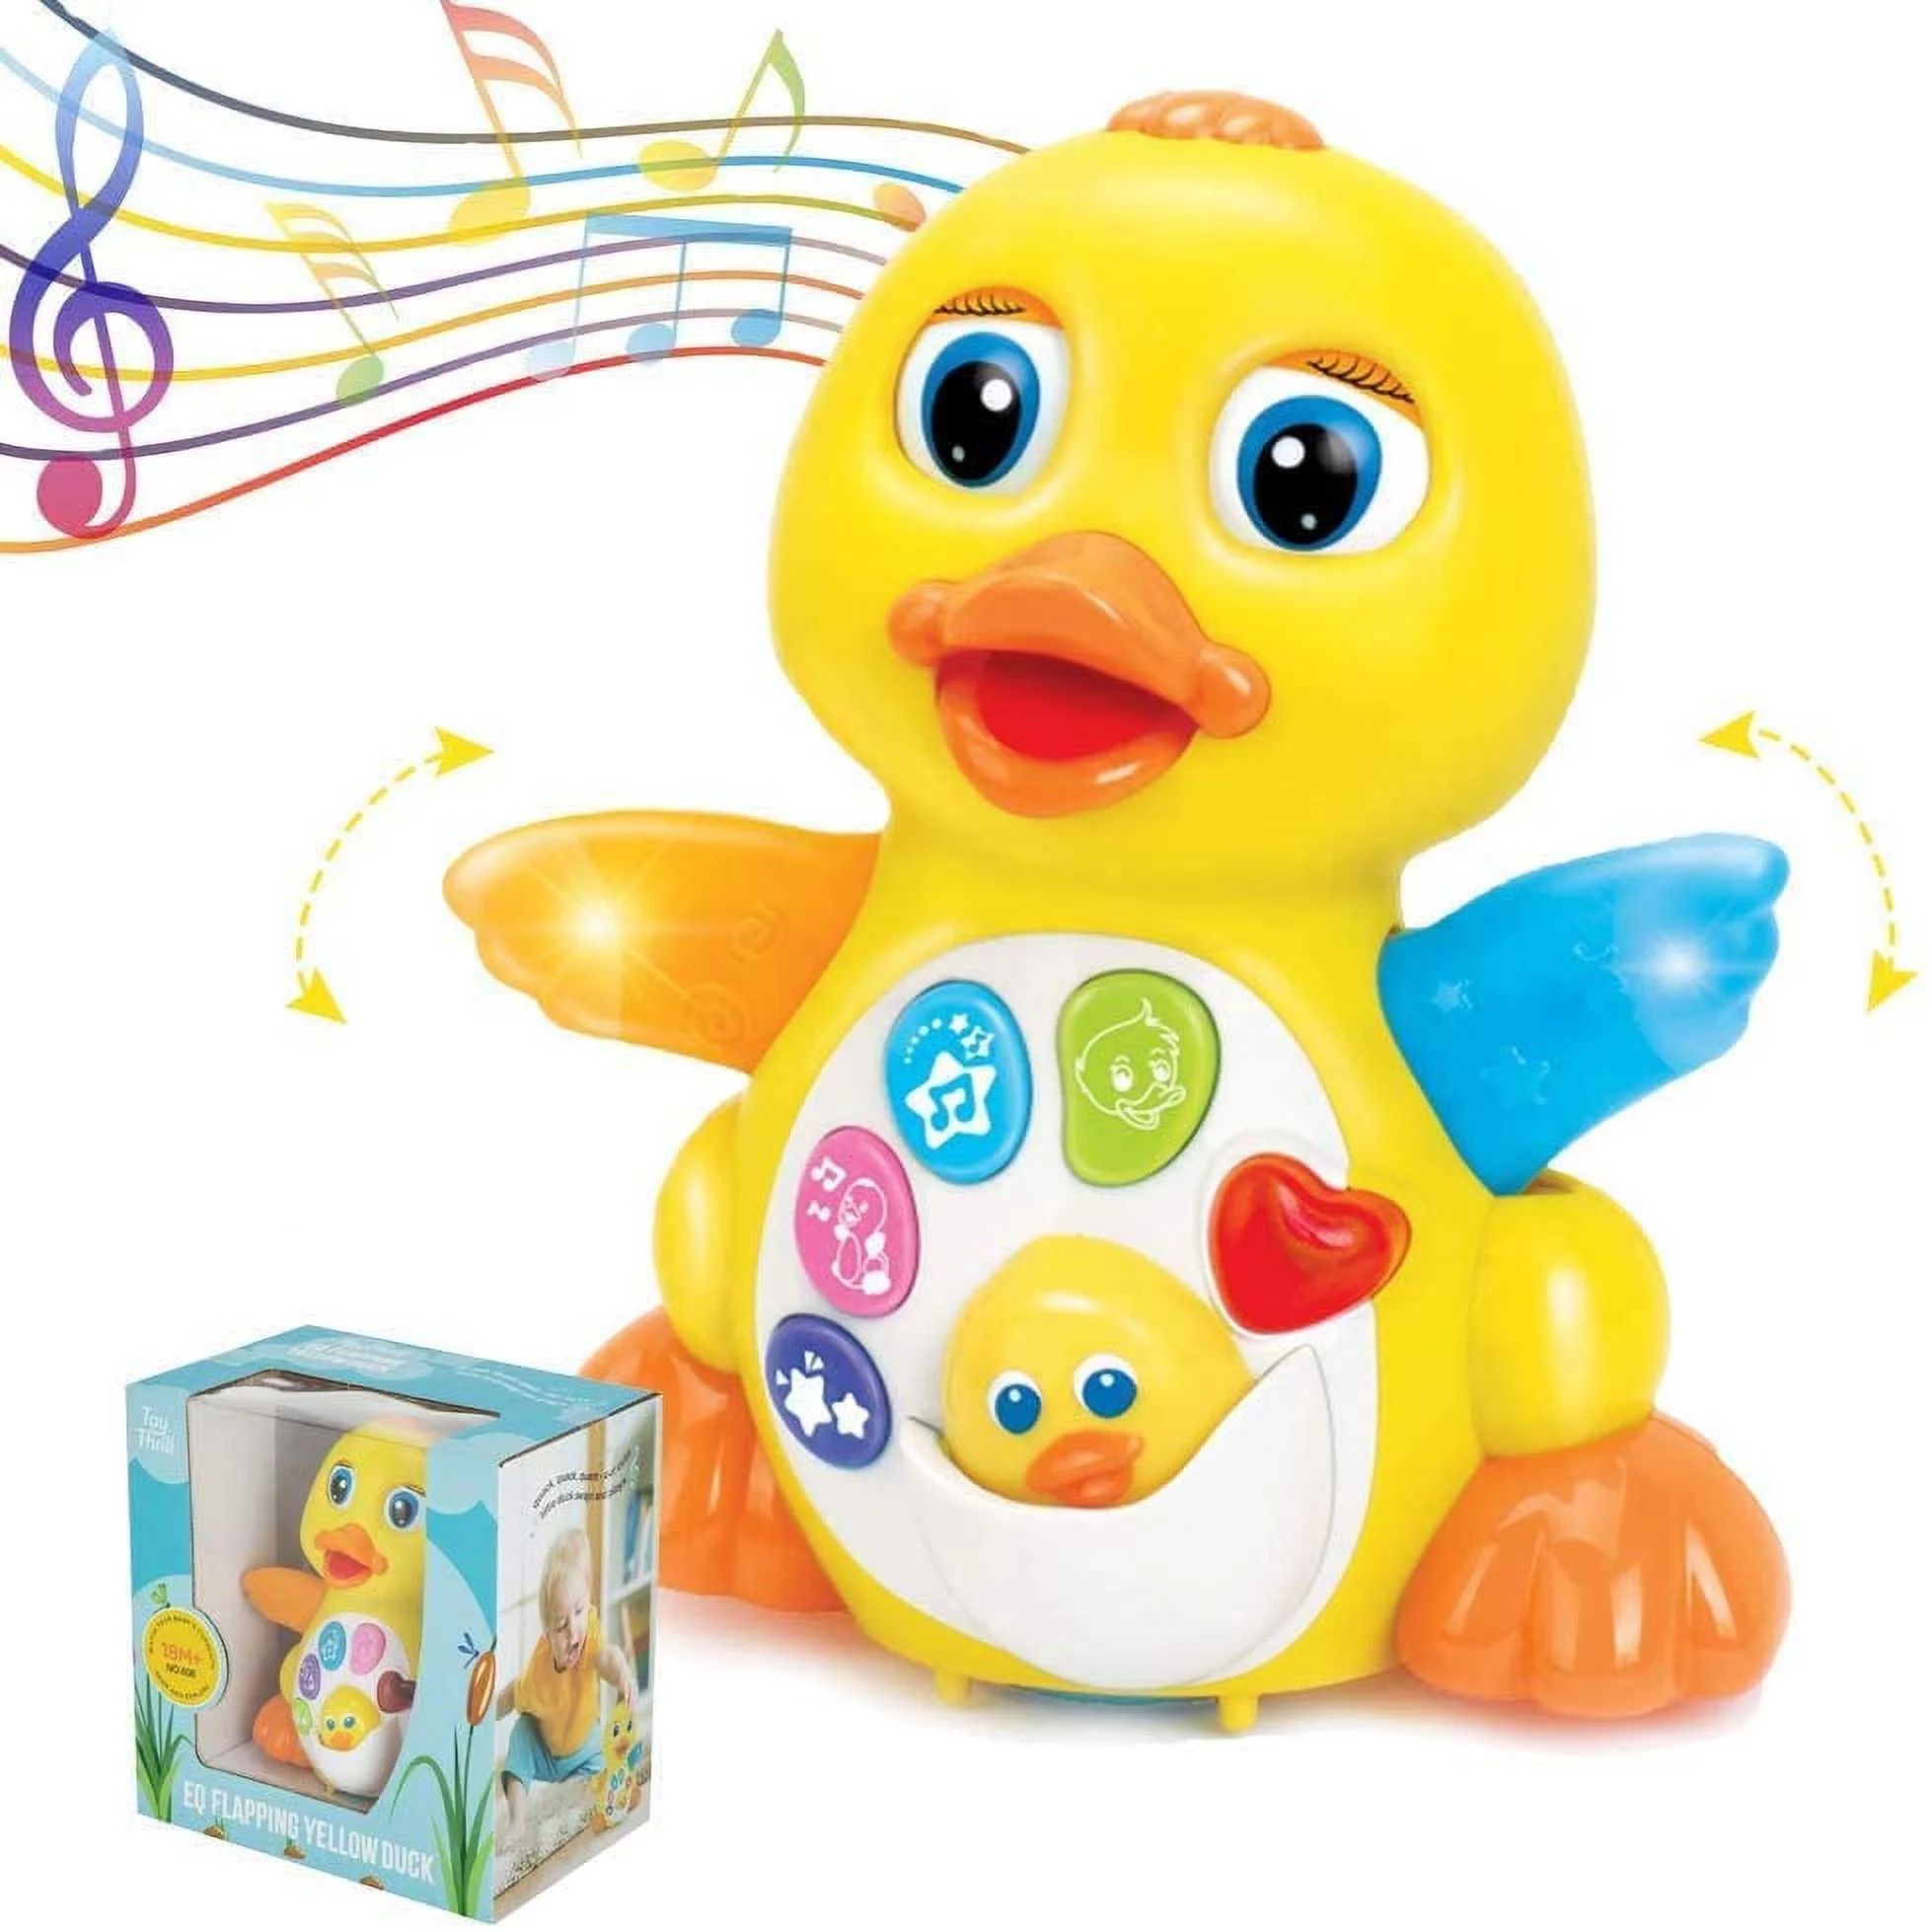 Light Up Dancing and Singing Duck Toy – Infant, Baby and Toddler Musical and Educational Toy - ... | Walmart (US)